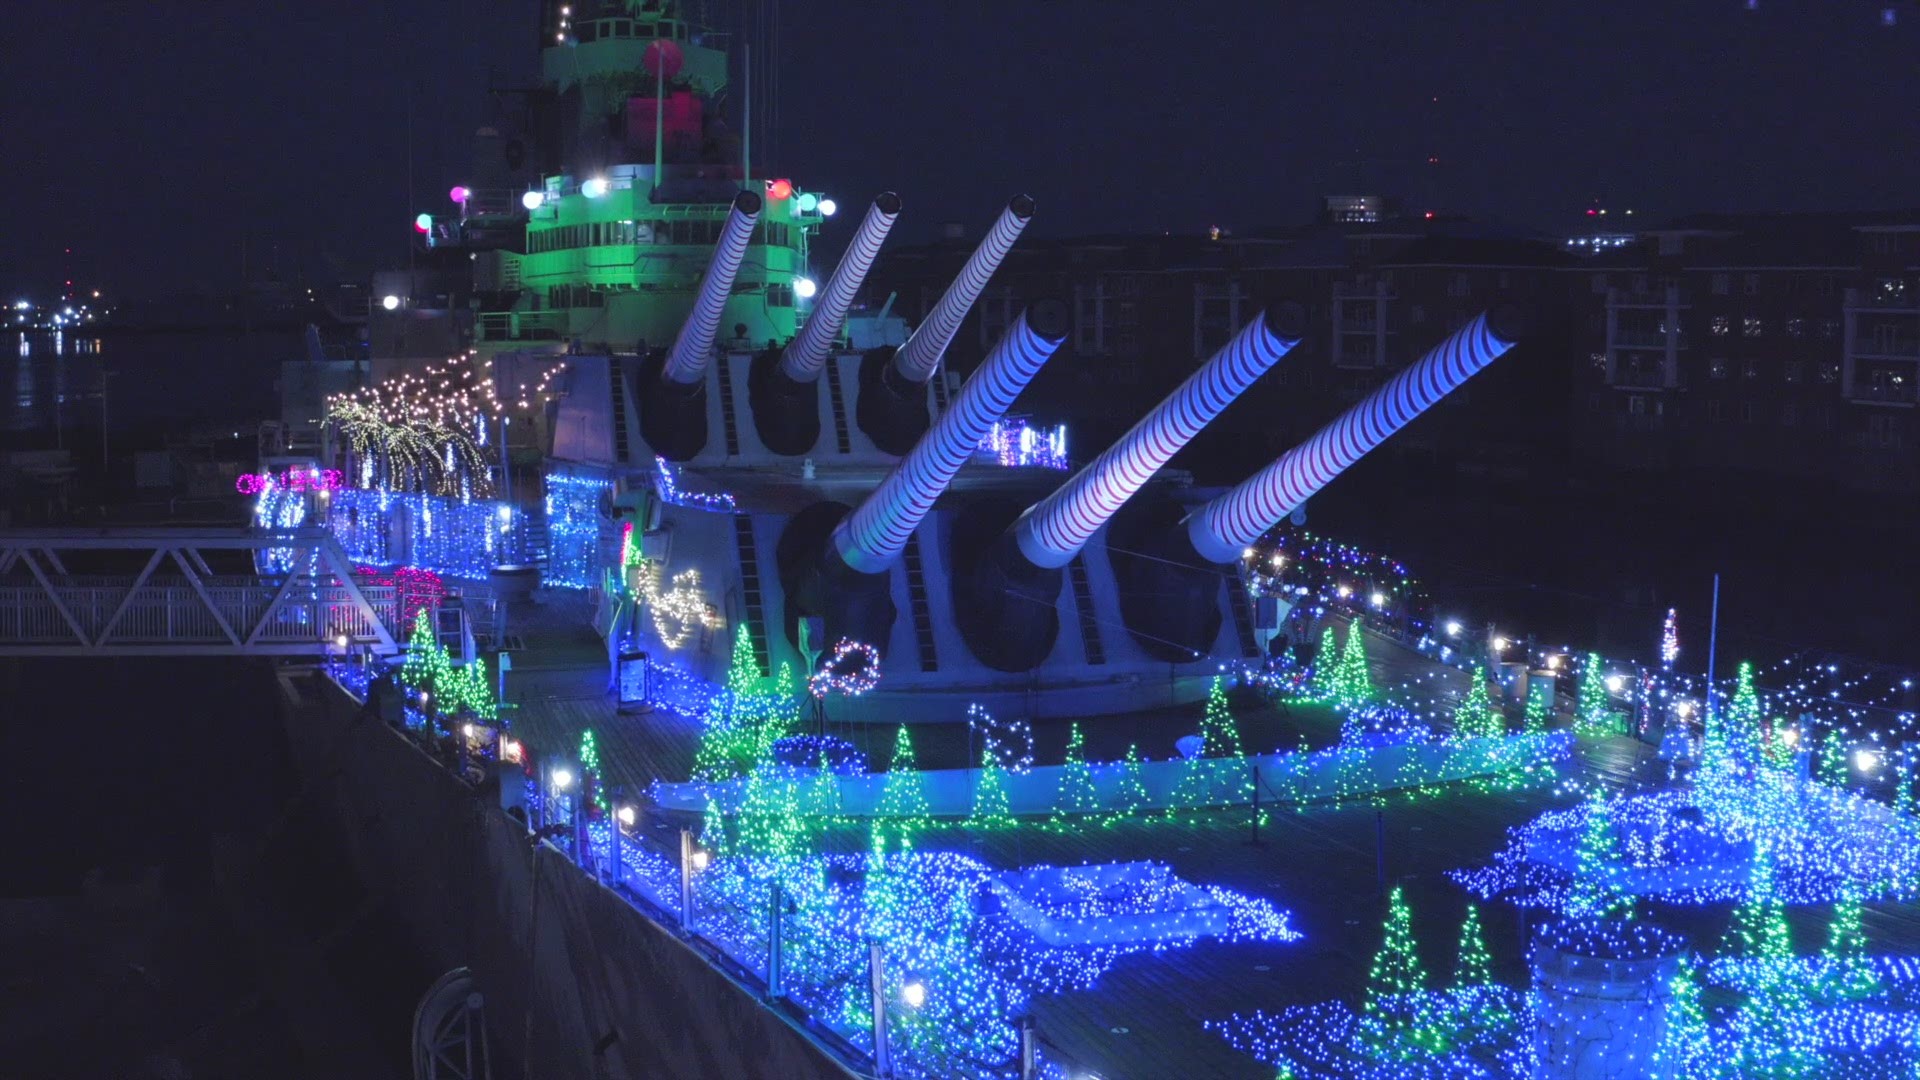 Drone footage of "WinterFest on the Wisconsin" which features more than 250,000 lights as part of the holiday display on the Battleship Wisconsin in Norfolk, Va.